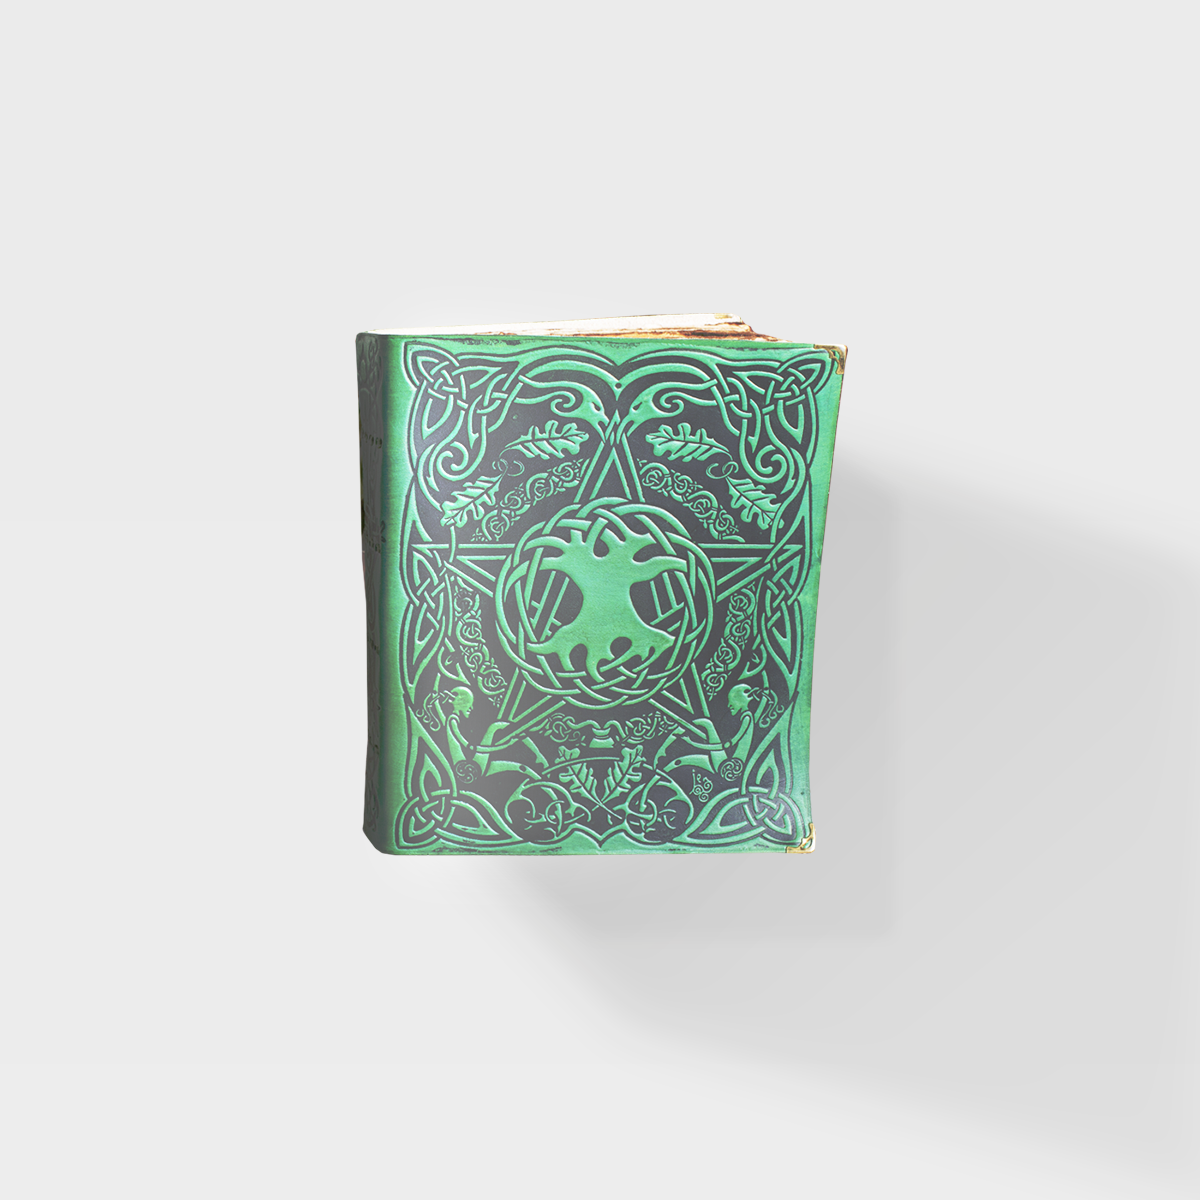 Universal Tree of Life - Jen Delyth - 8x10 - Green Leather Journal